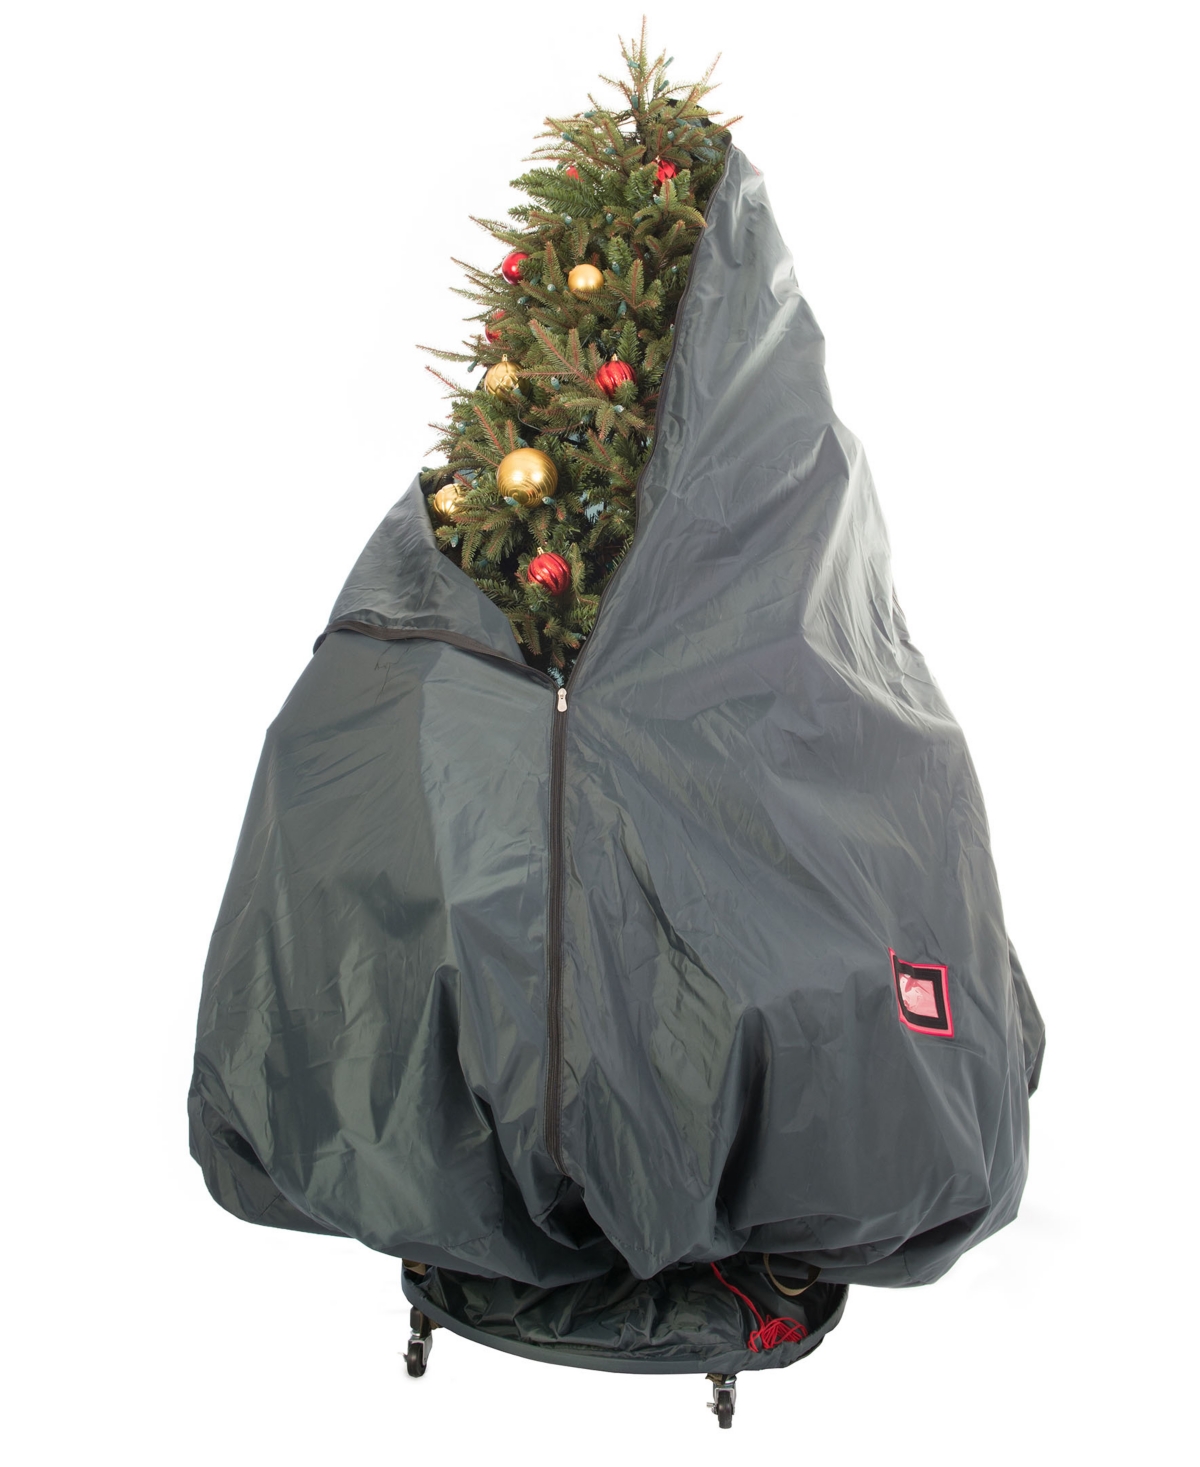 Upright Assembled Christmas Tree Bag with Wheels, 7'-9' trees - Green